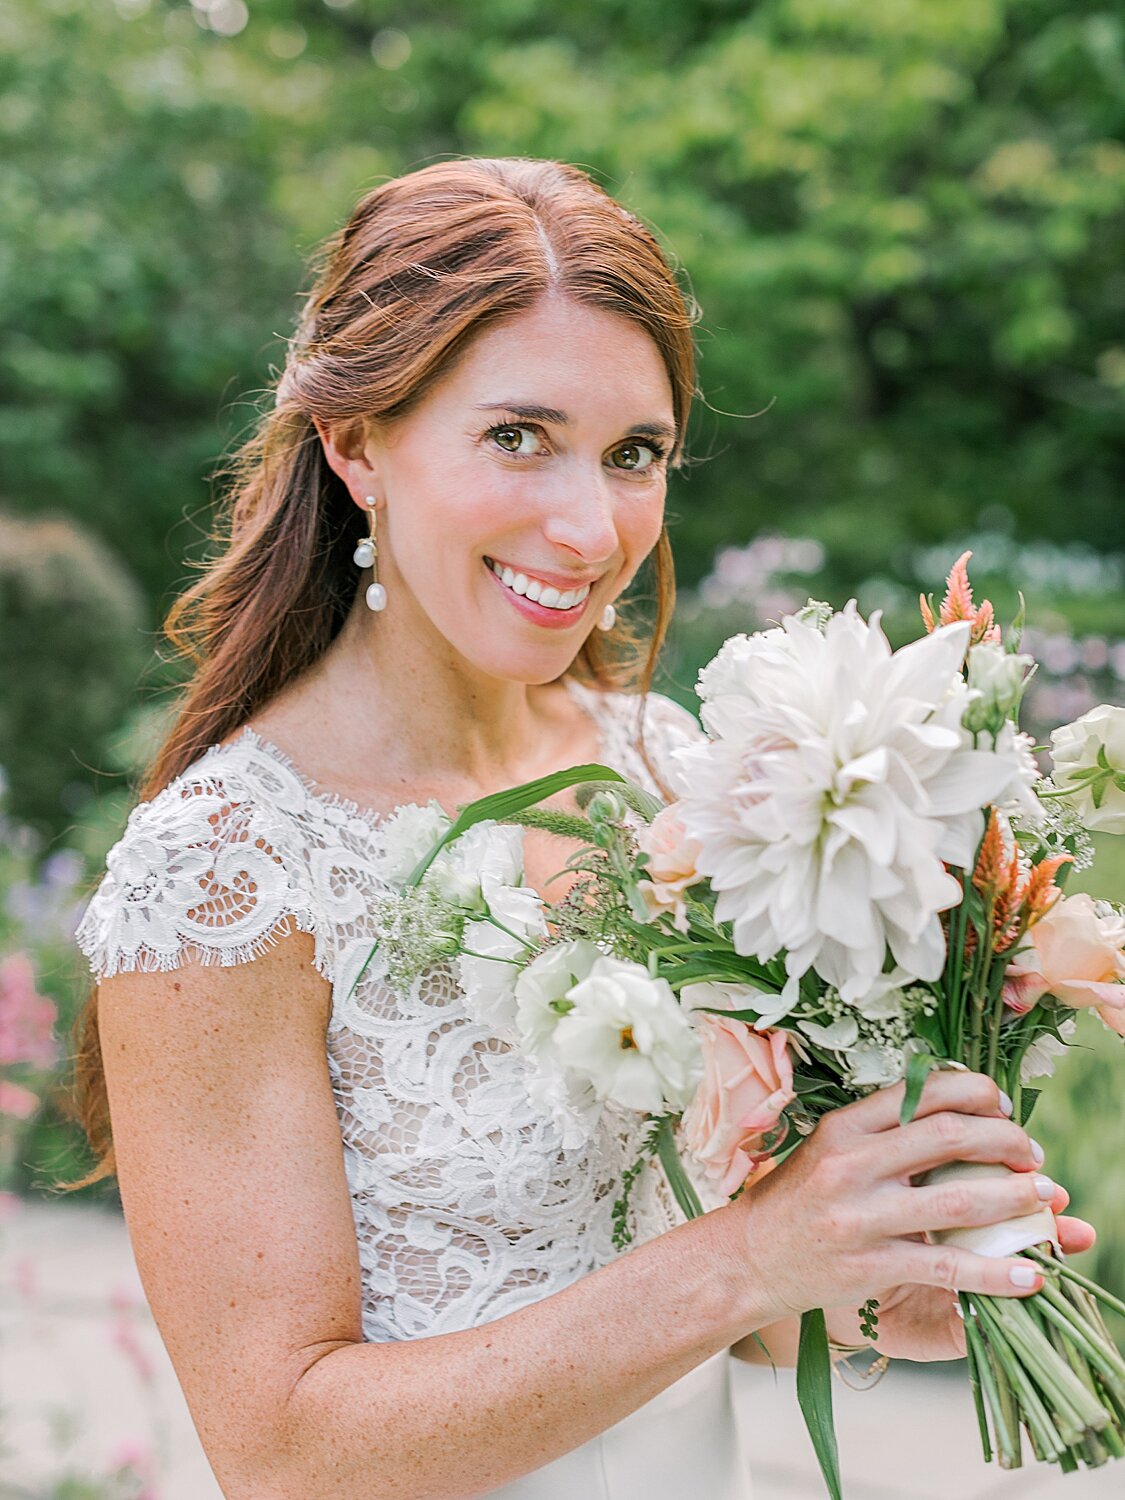 bride holds bouquet of wildflowers | Asher Gardner Photography | Elopement at the Central Park Conservatory Gardens